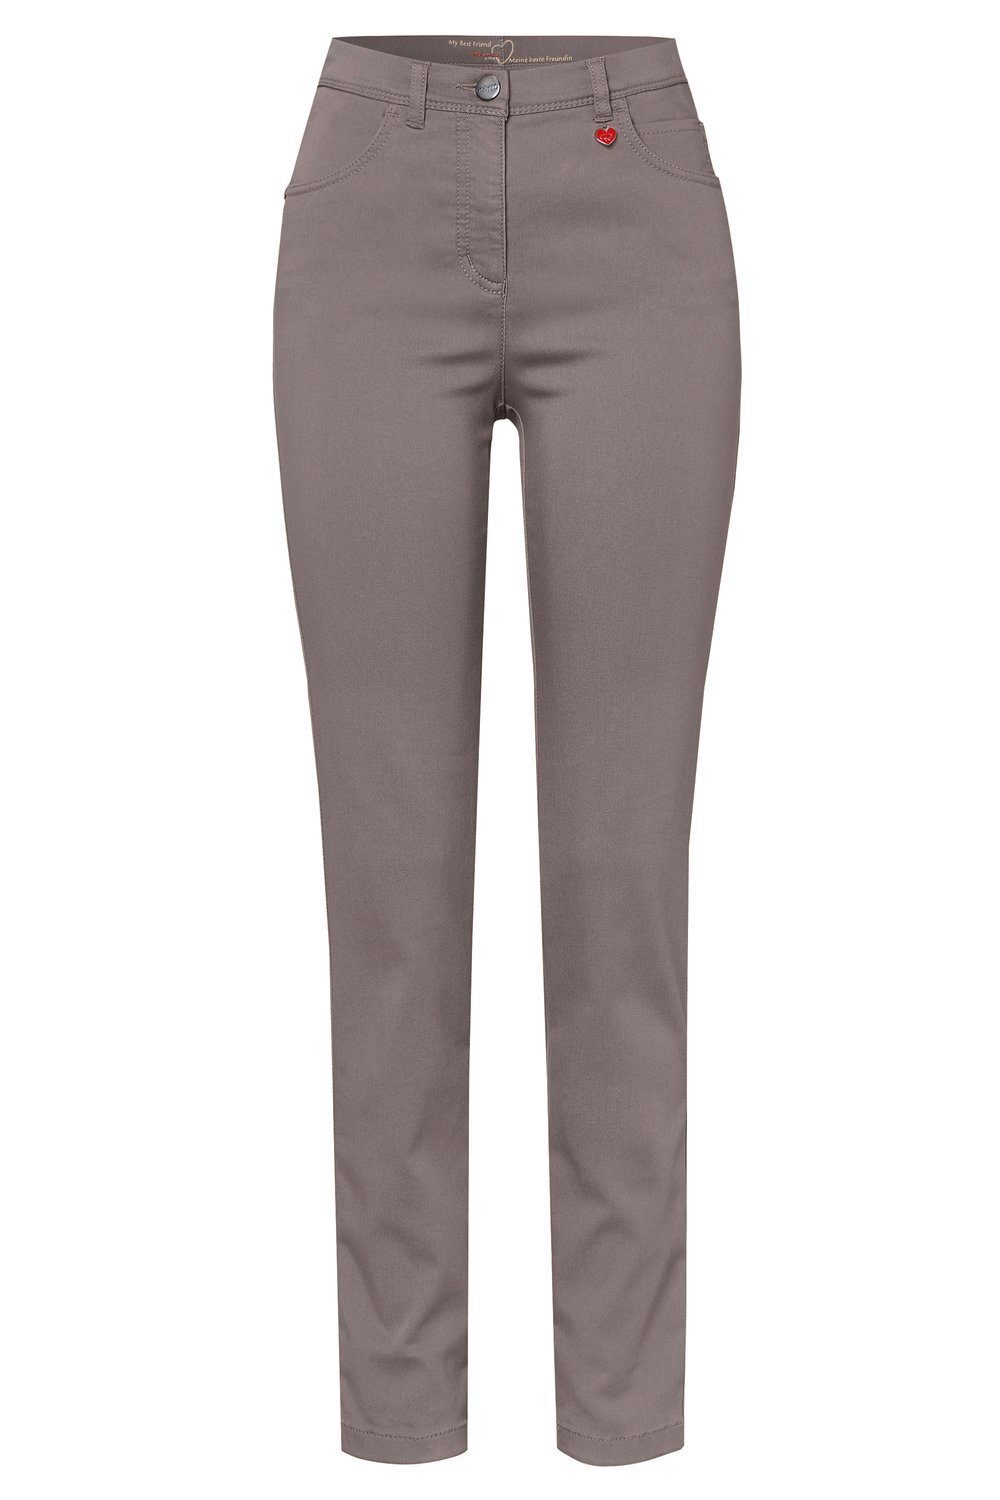 Relaxed by - Freundin in schmaler taupe Passform beste 075 TONI 5-Pocket-Hose Meine